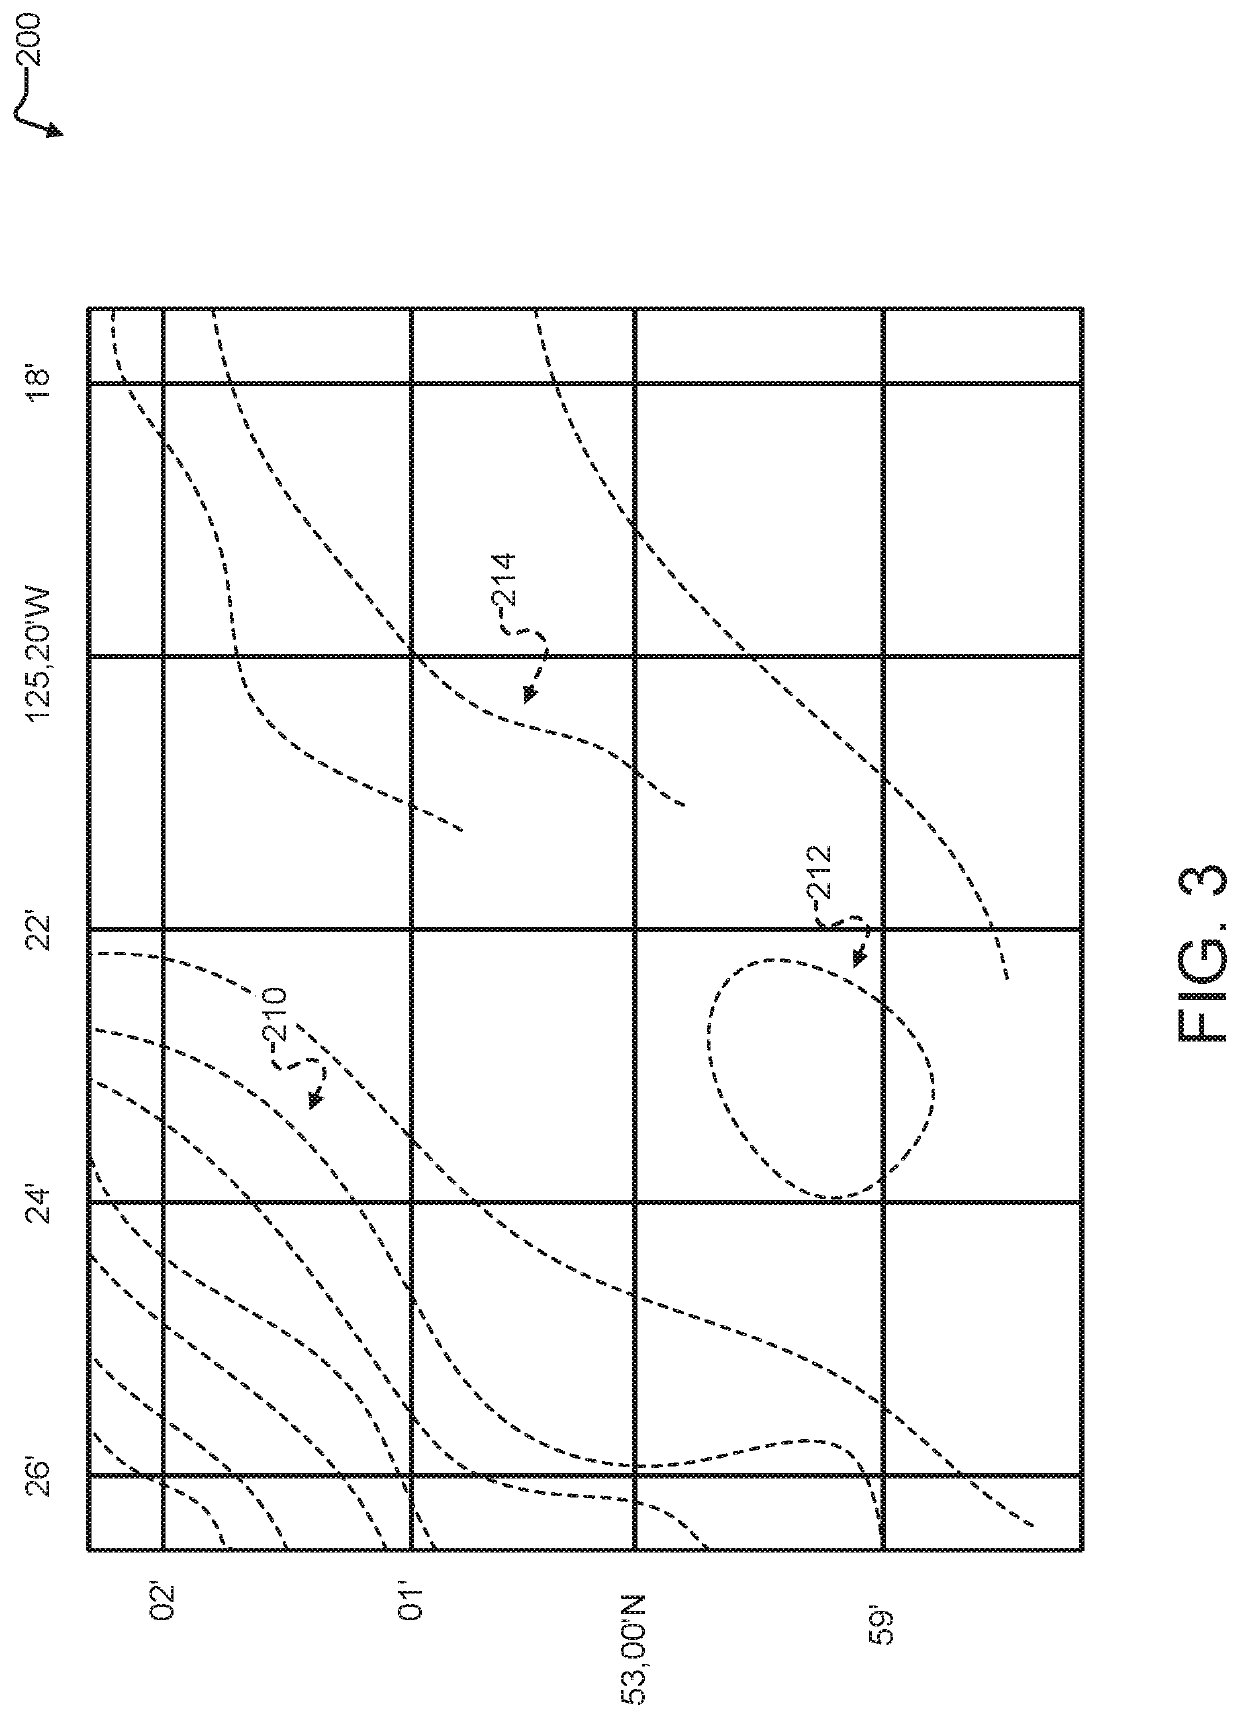 Geographic coordinate based setting adjustment for agricultural implements